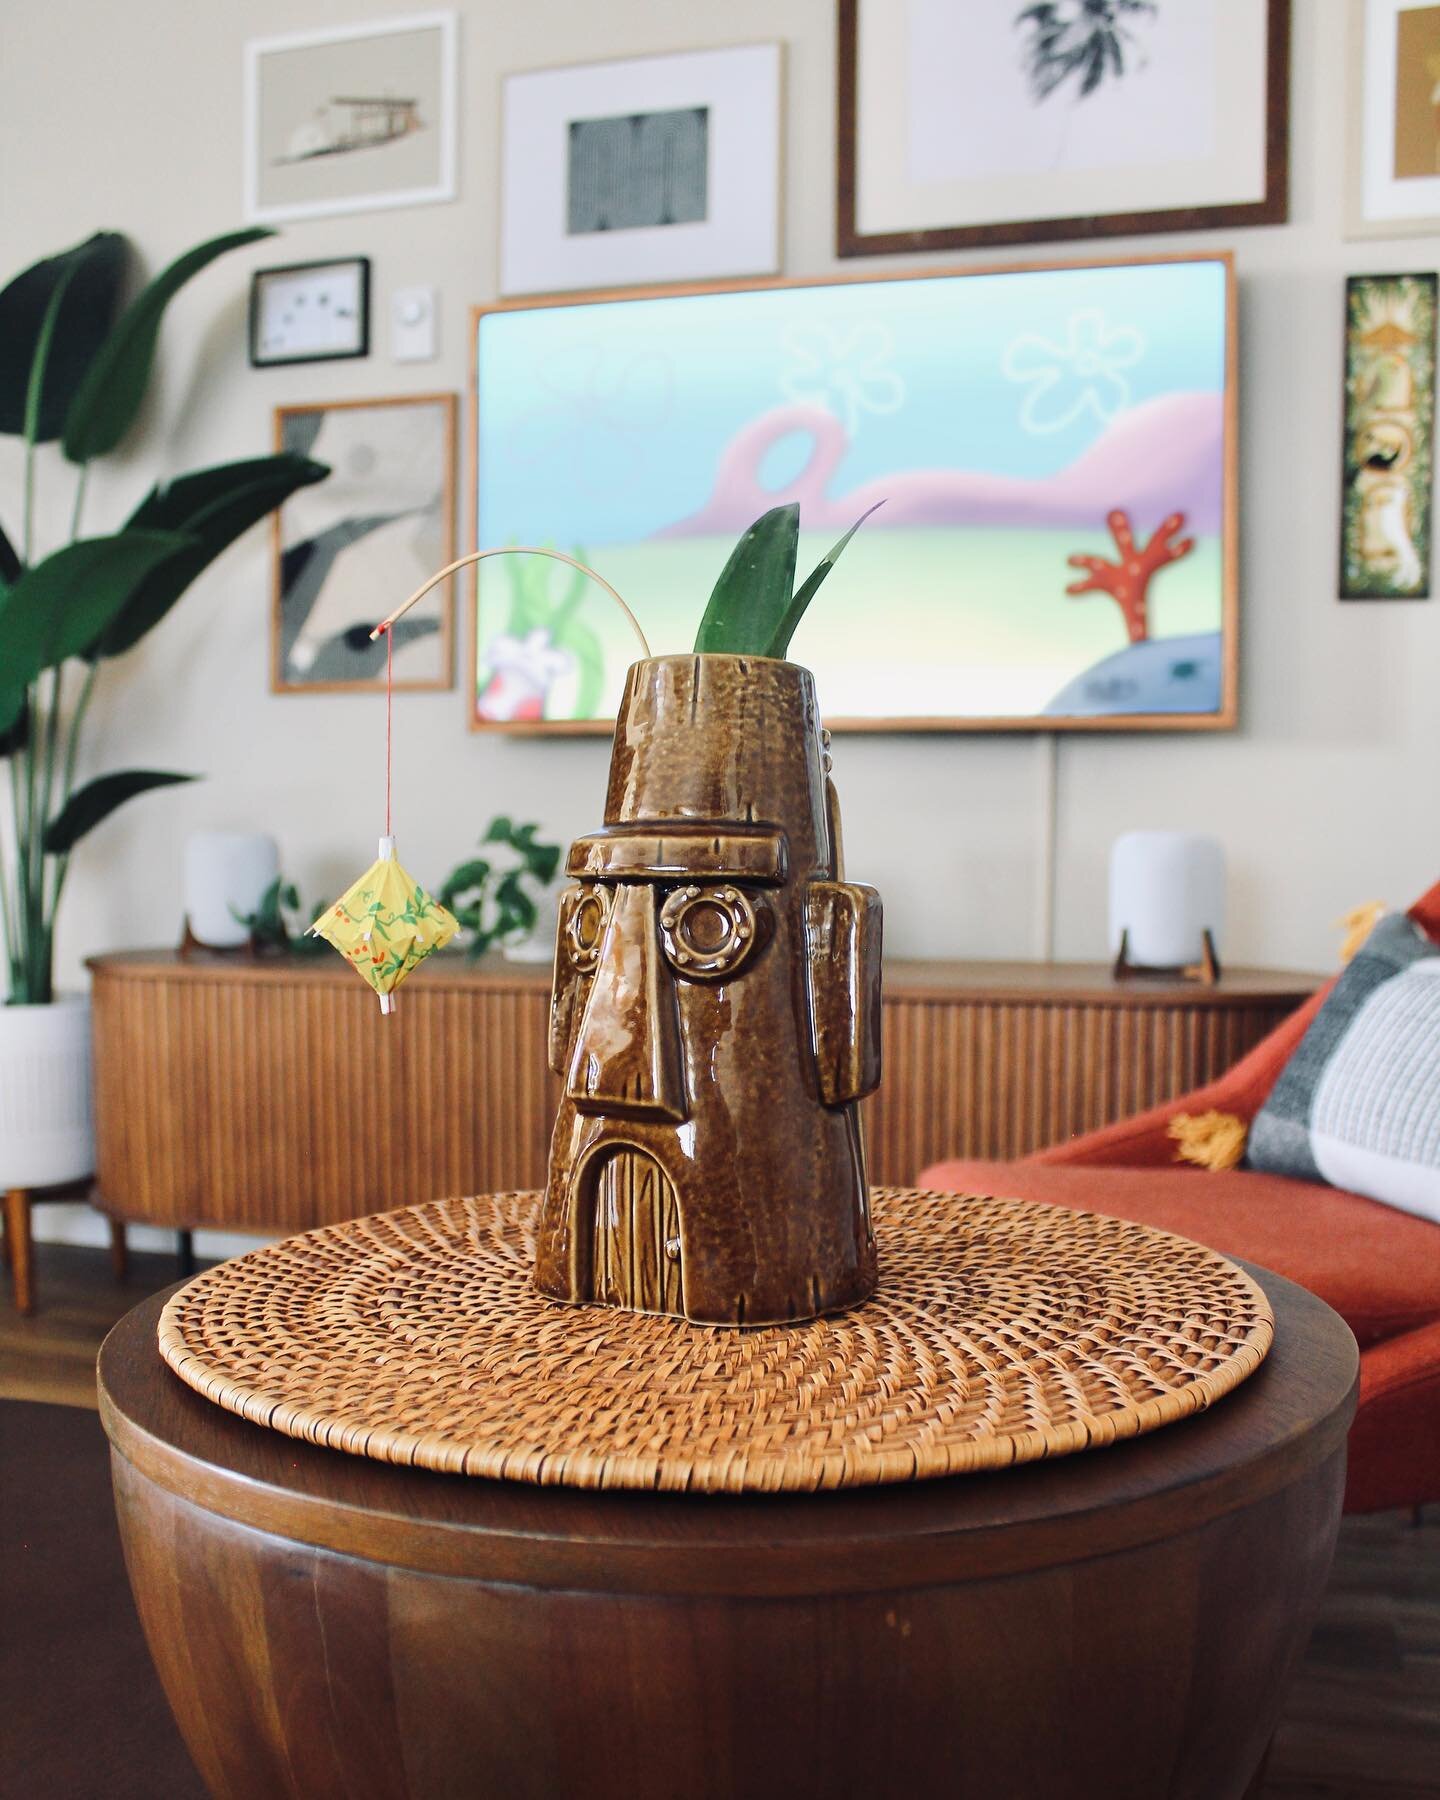 Who lives in a Moai under the sea? Squidward Tentacles! Thanks to our tiki girl Anne for gifting us this cool @beelinecreative tiki mug of Squidward&rsquo;s house! 
Can you spot him??
🗿🦑🍍🧽#MugMonday